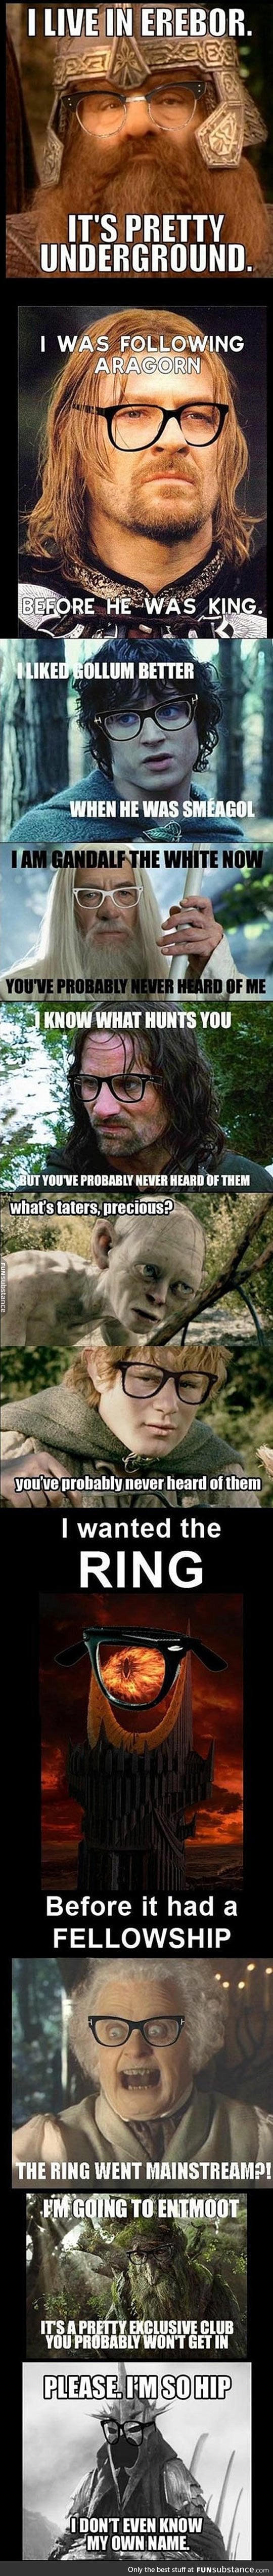 The lord of the rings is full of hipsters